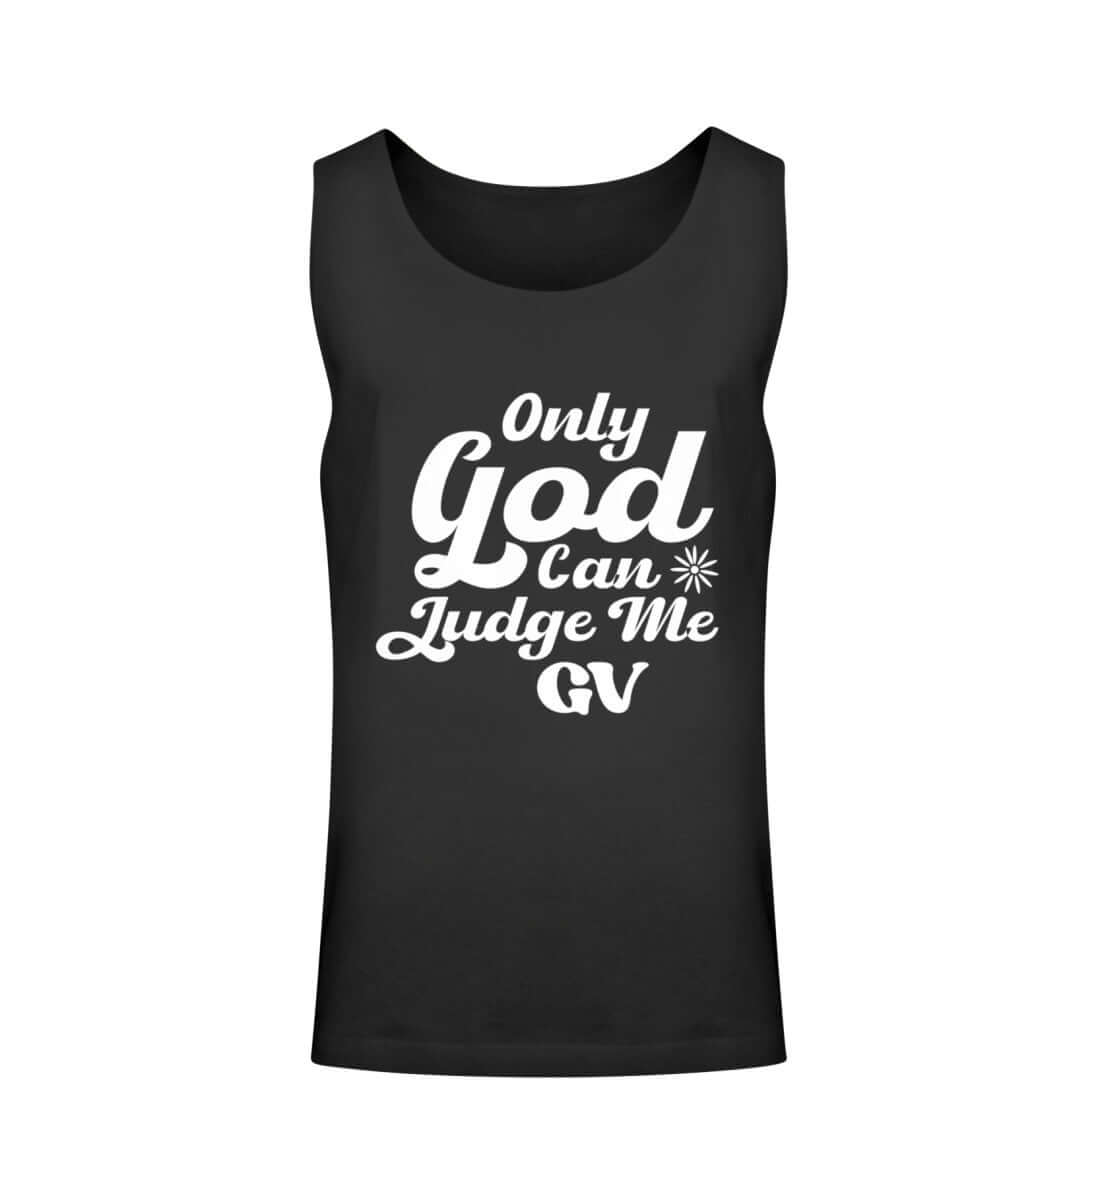 'ONLY GOD CAN JUDGE ME' TANKTOP - GODVIBES